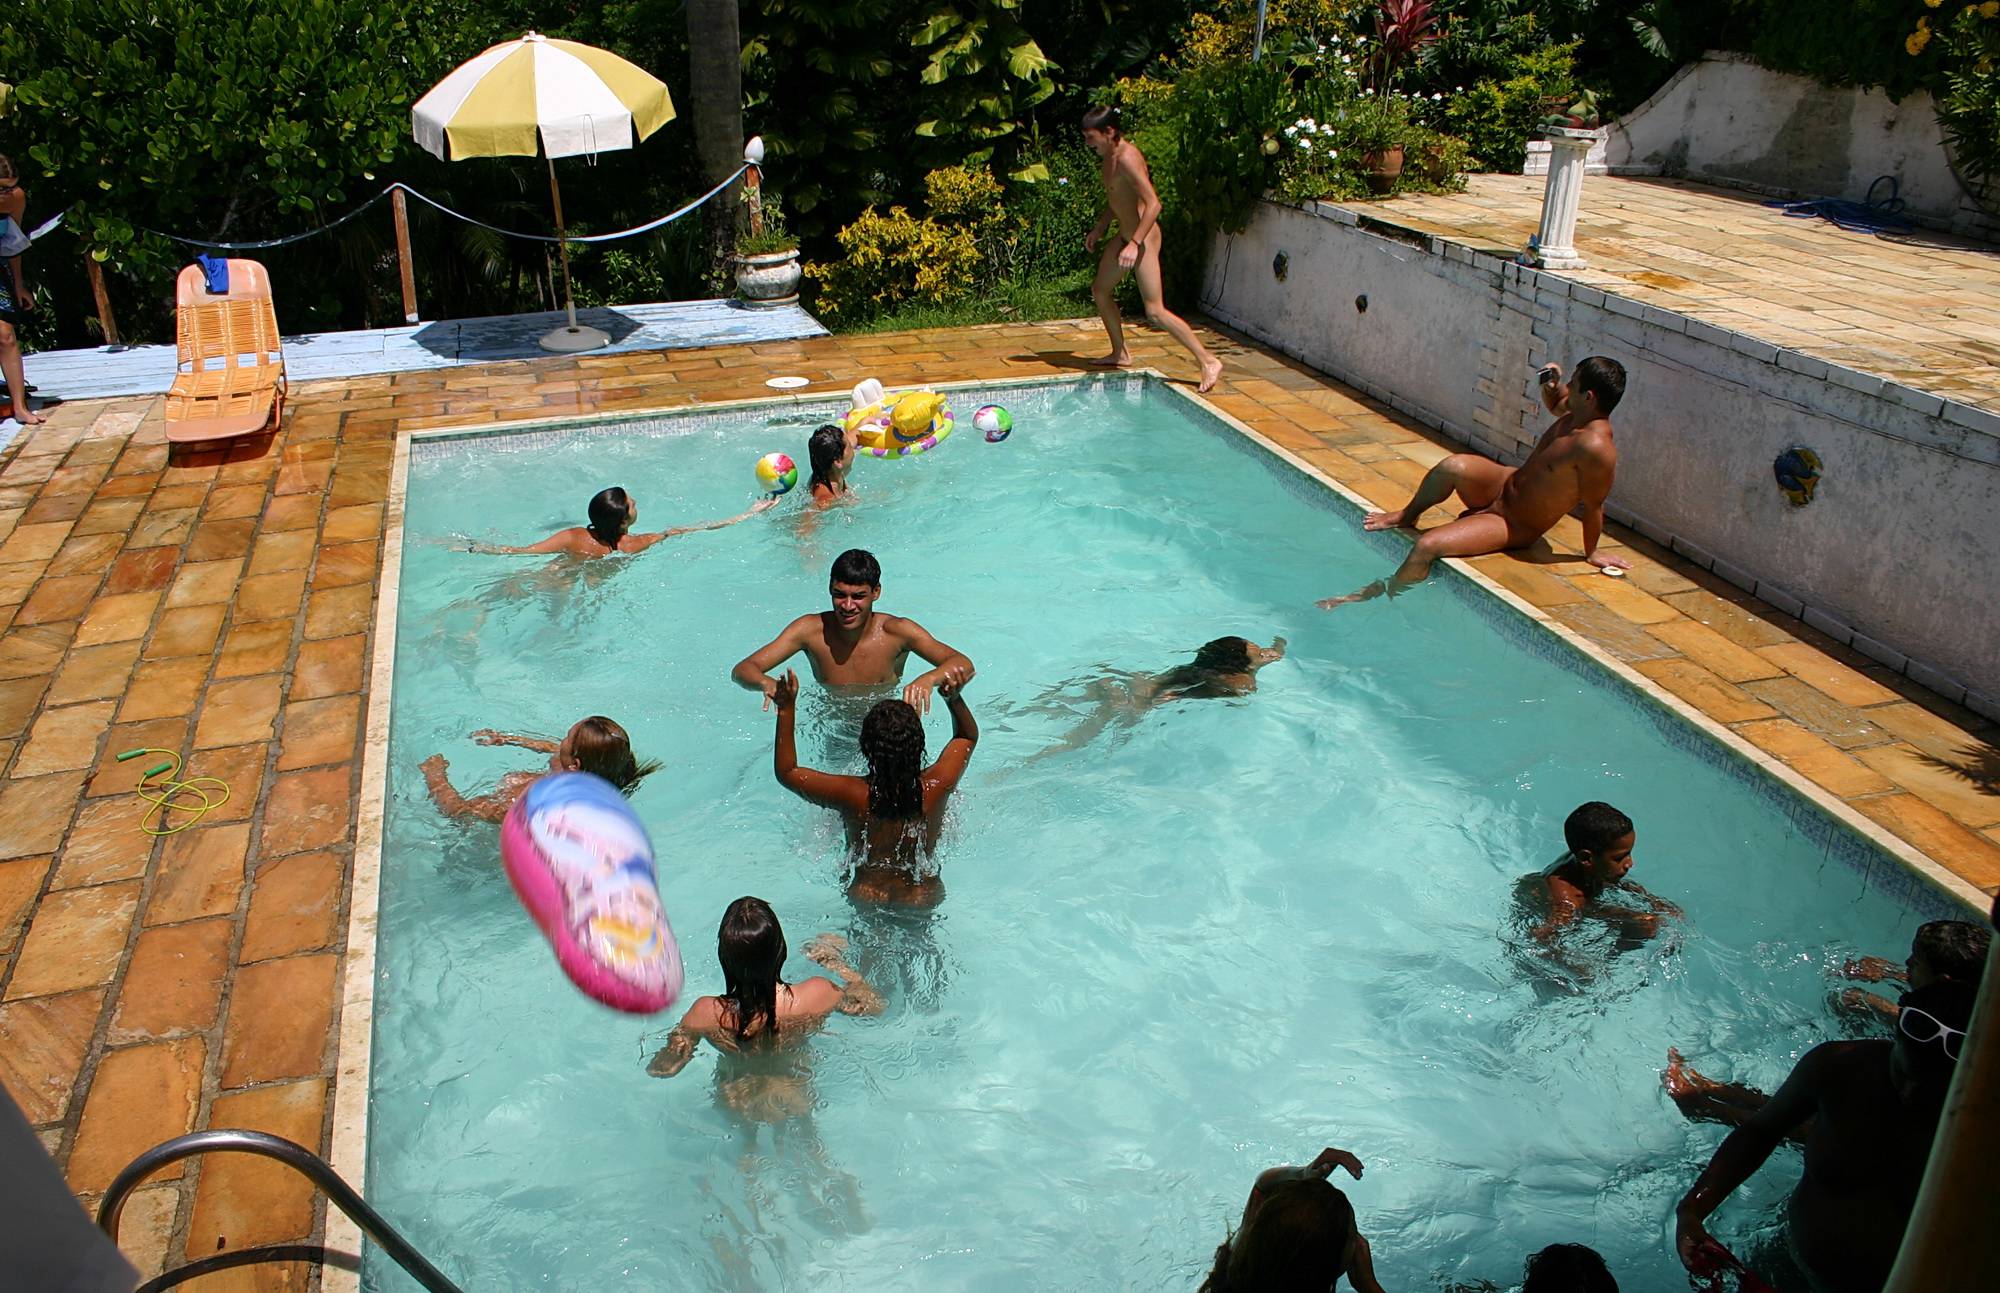 Purenudism Images Inner-Pool Play Grounds - 2